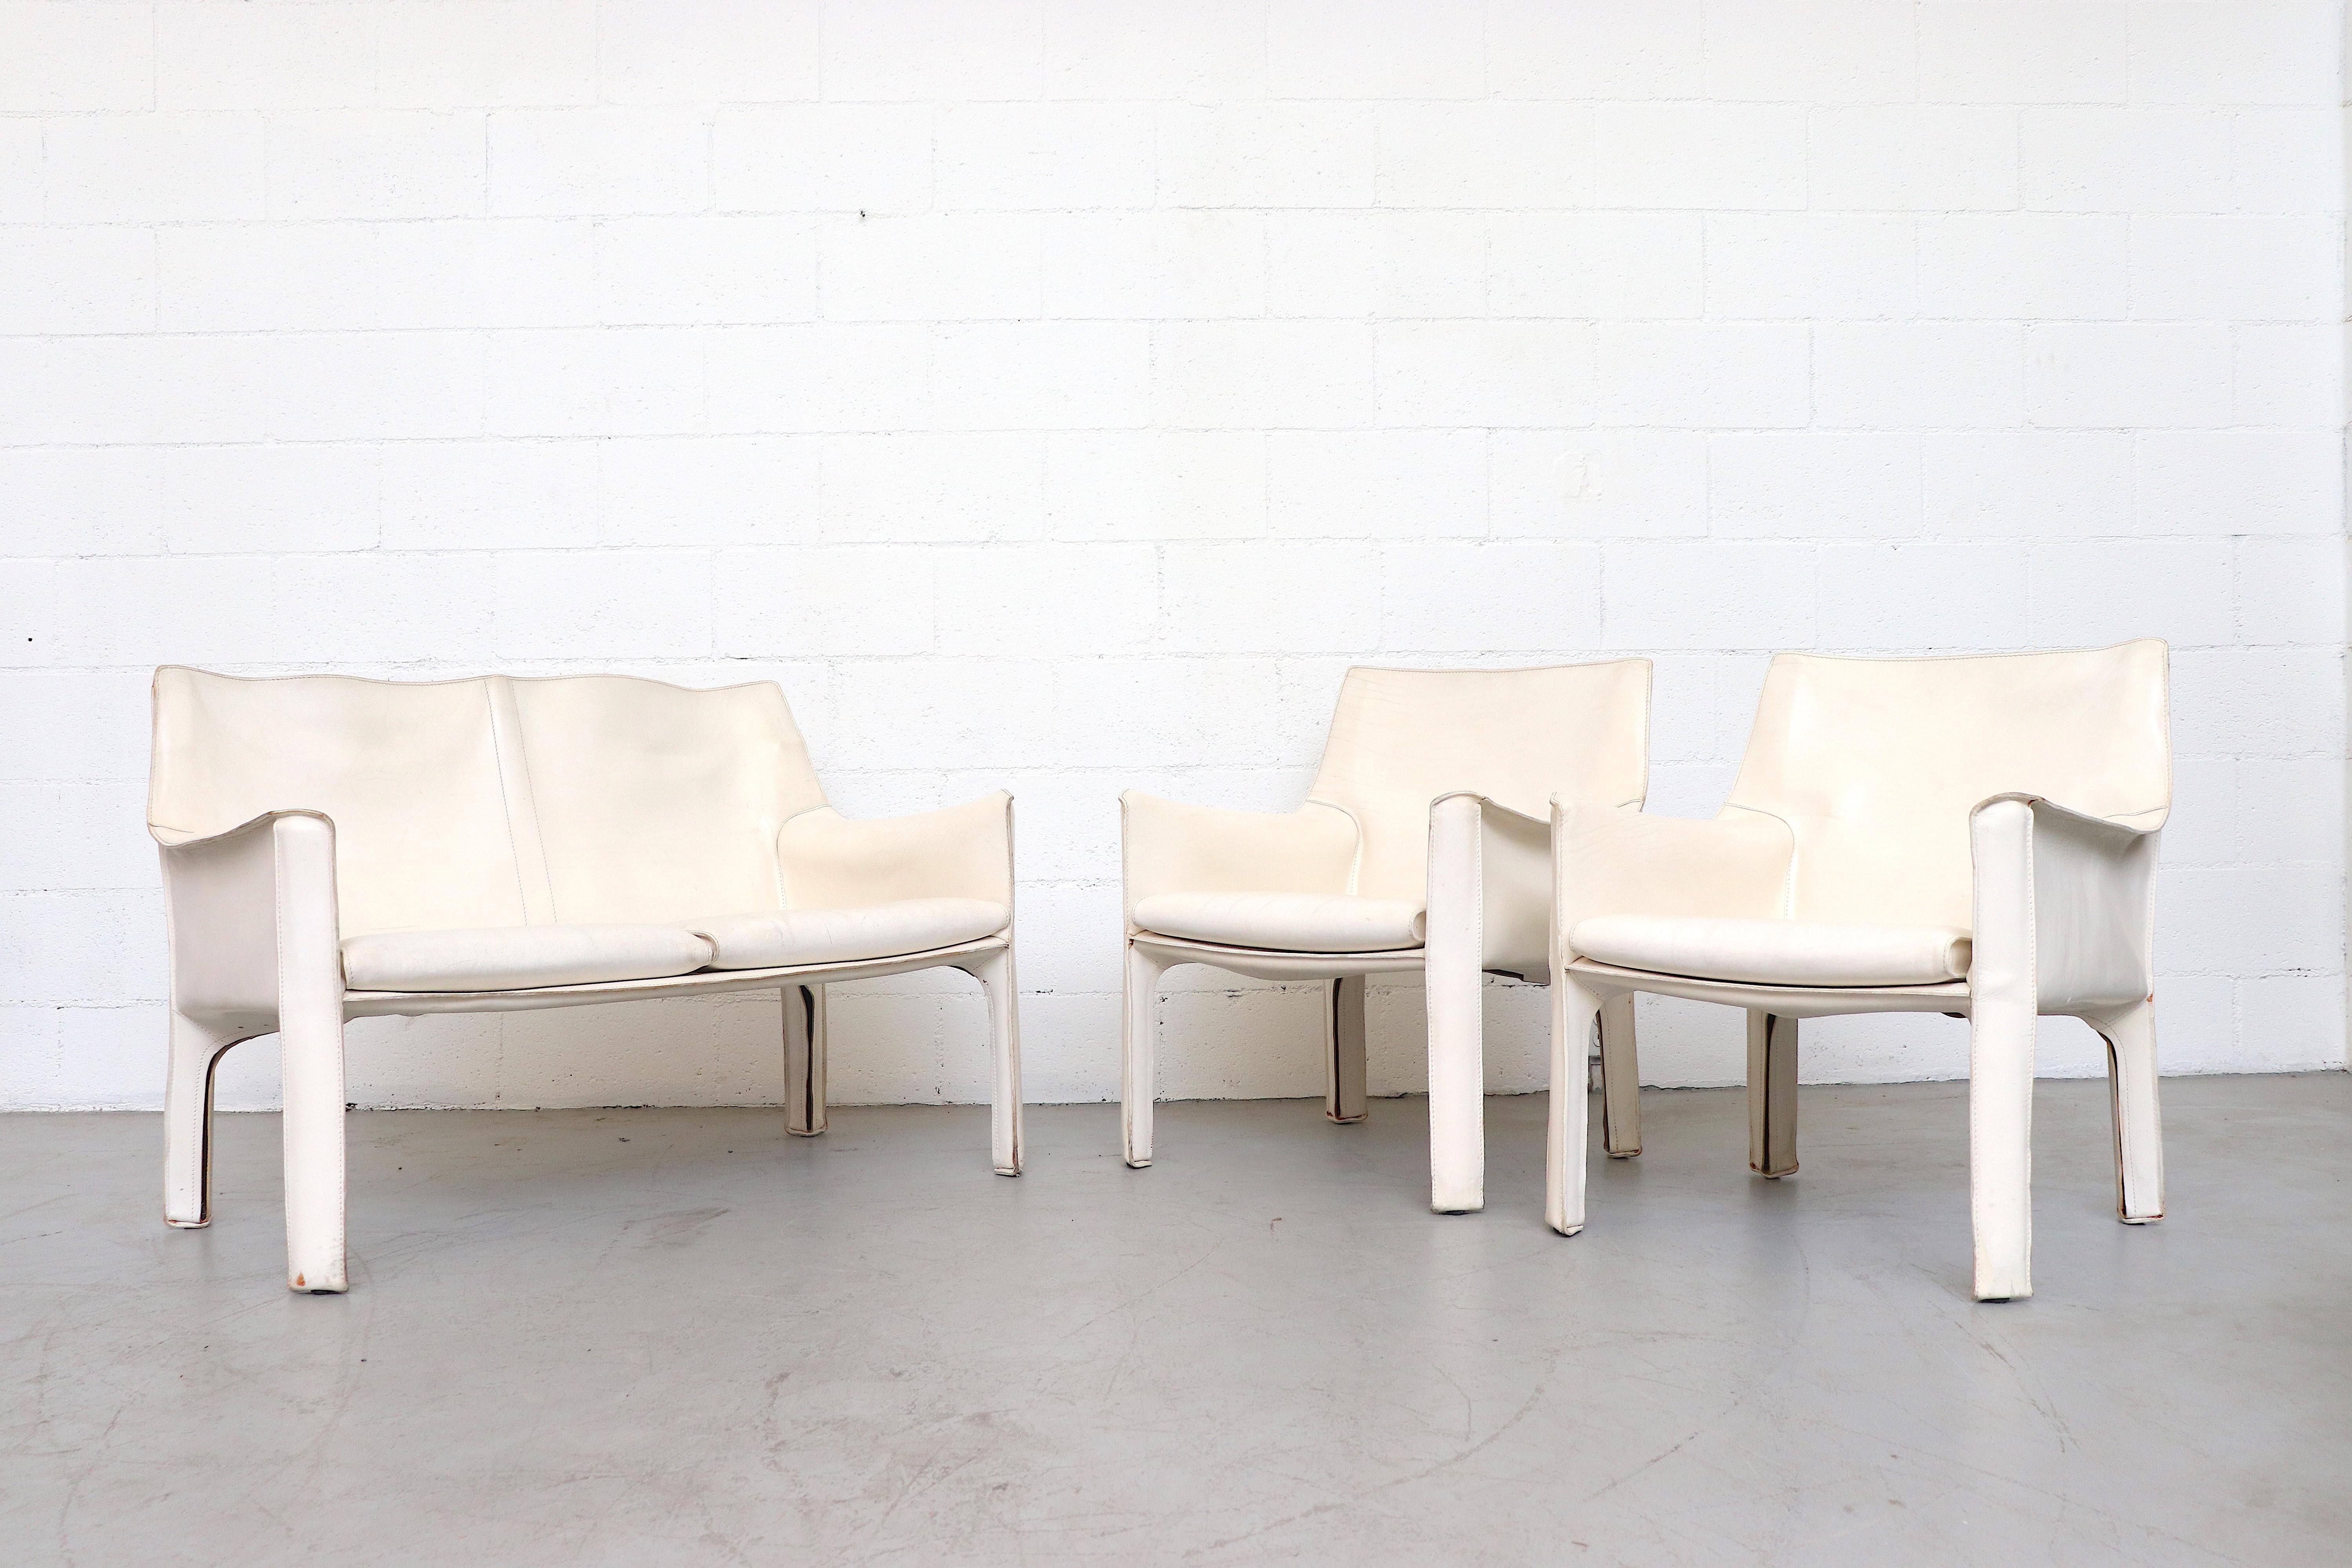 Mario Bellini White Leather cab love seat for cassina. In original condition with very visible signs of wear consistent with its age and usage.